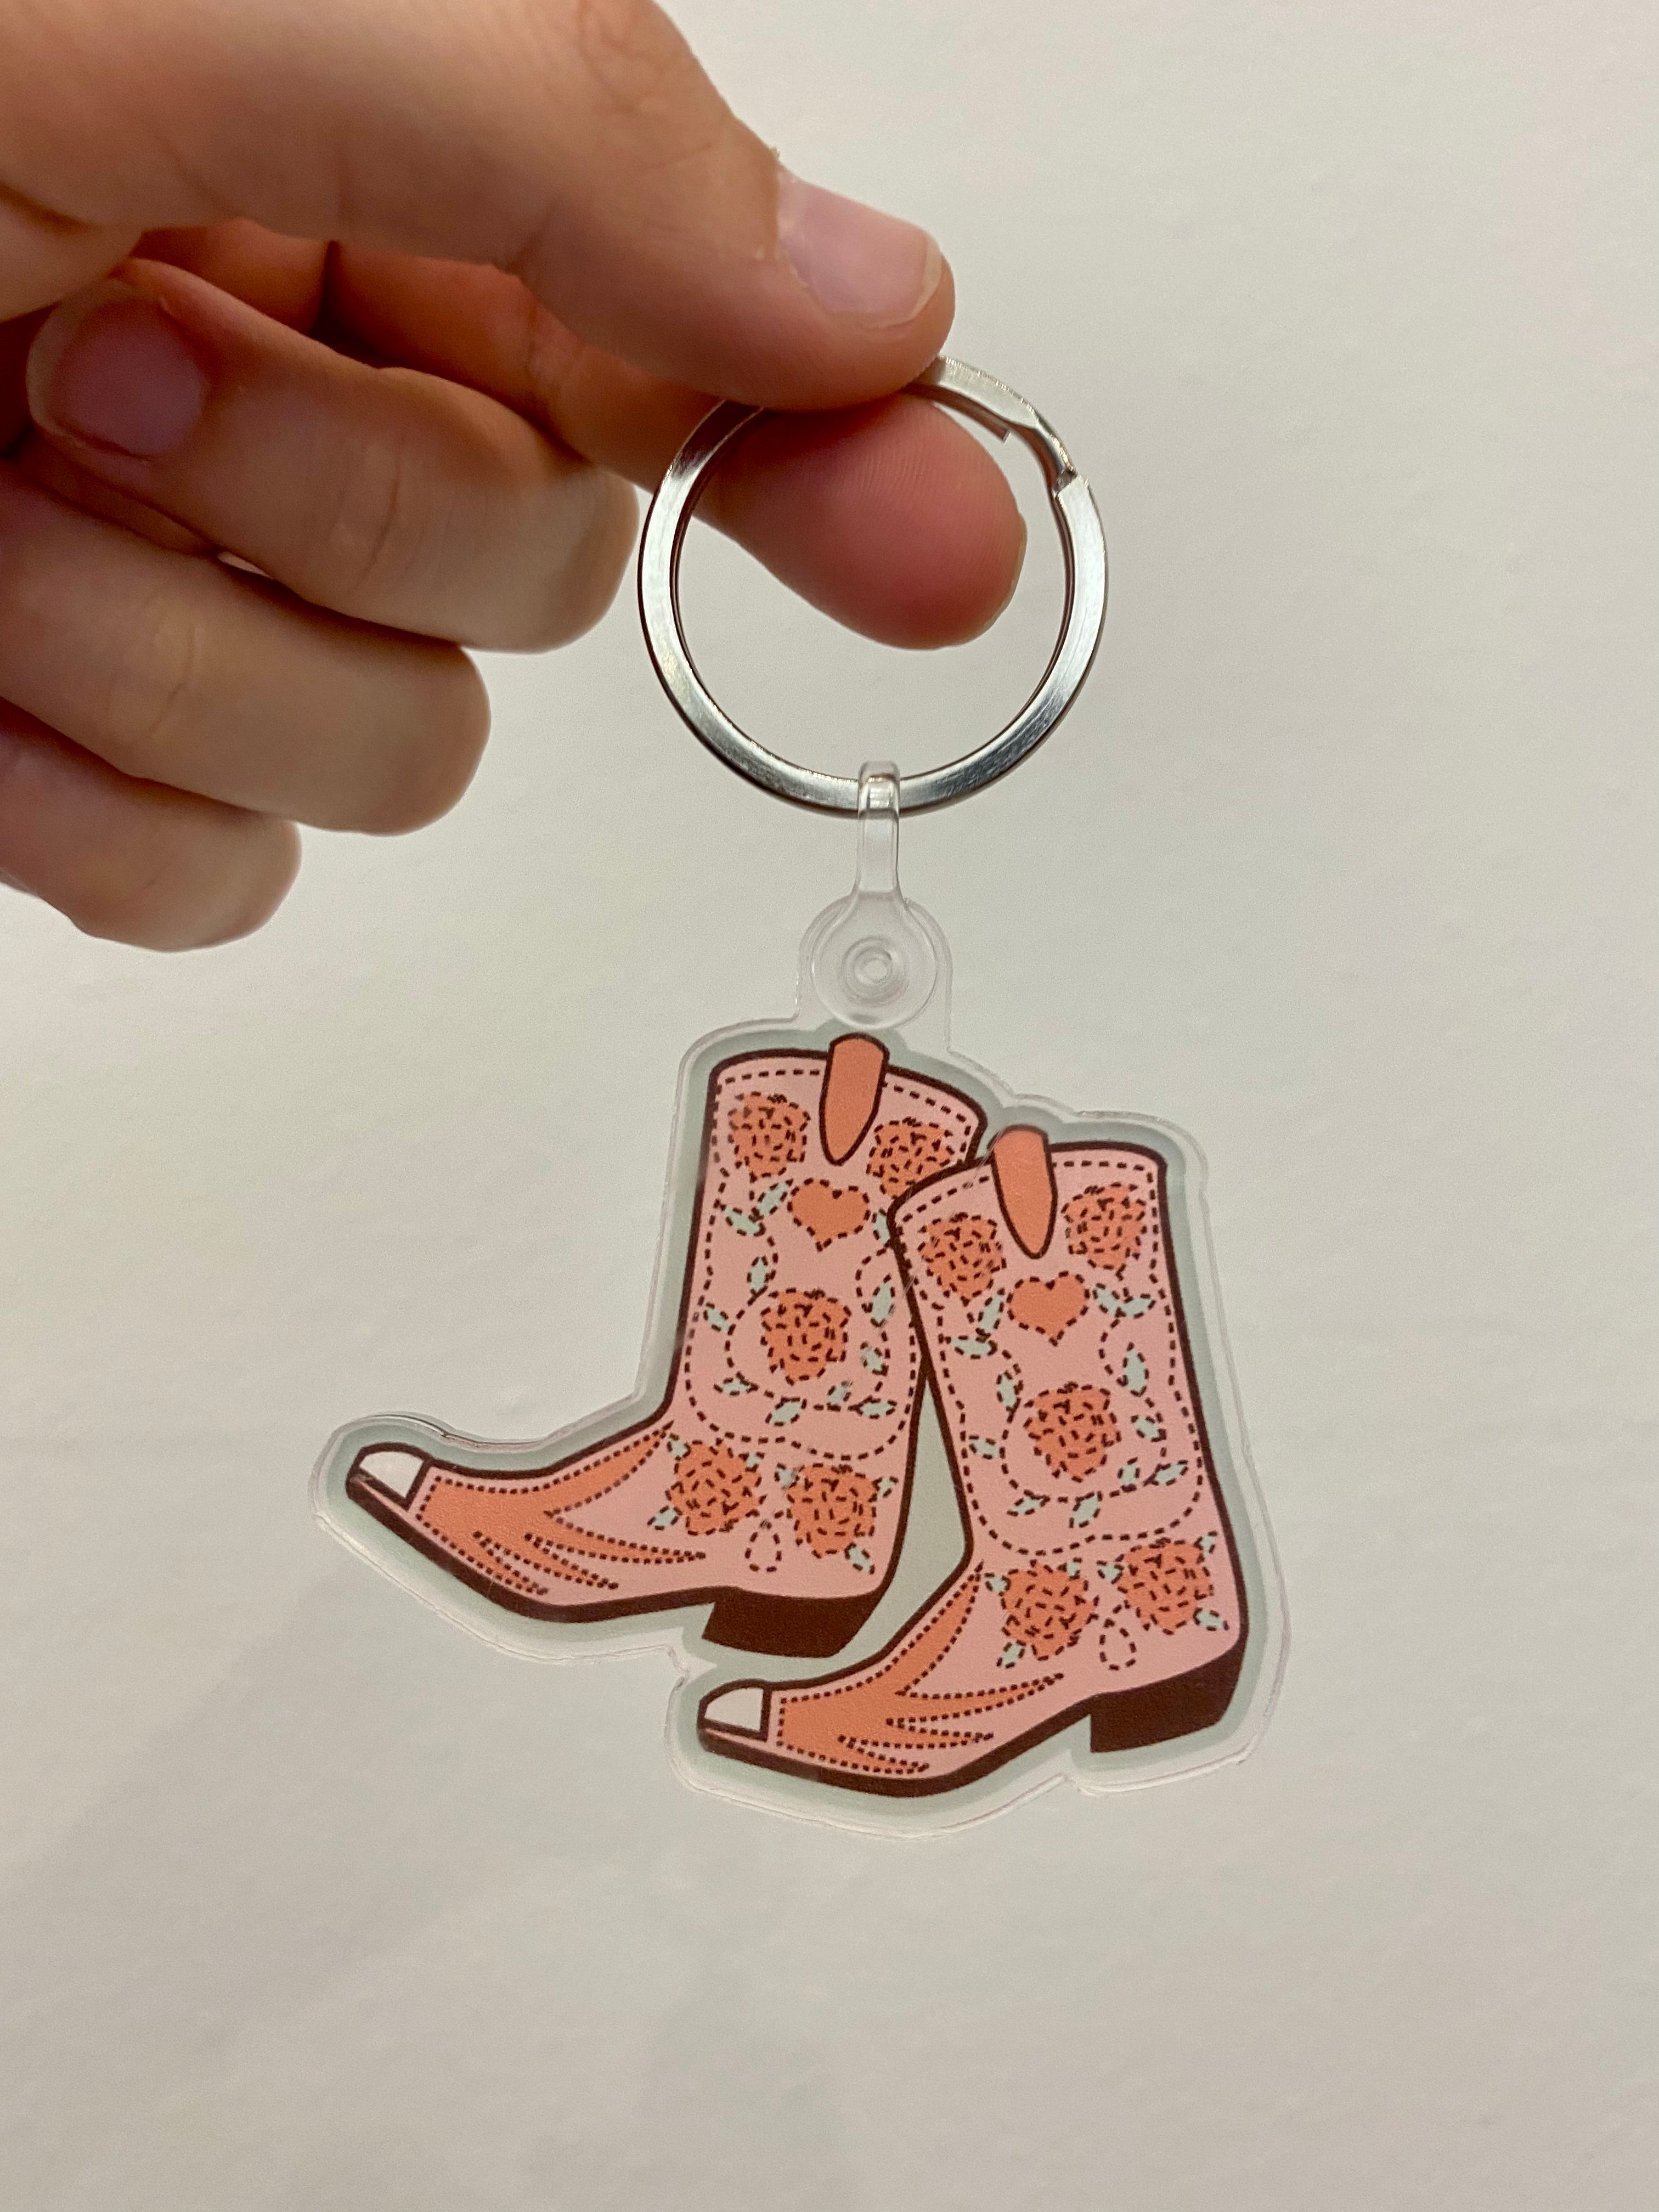 Cowgirl Boots Keychain